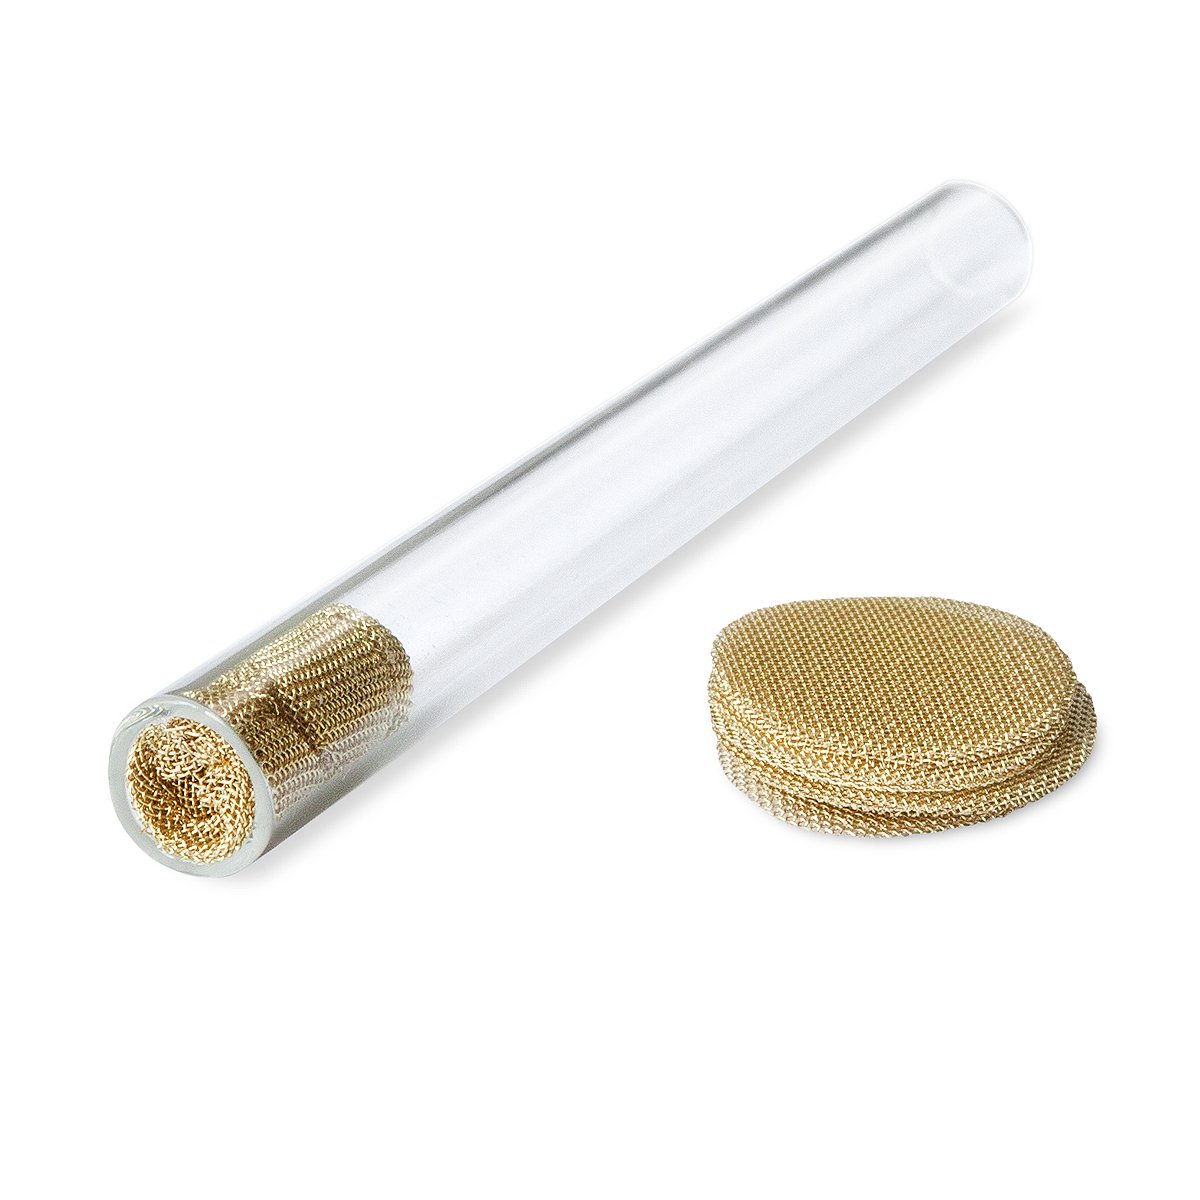 Crack pipe (with brass gauze filter)